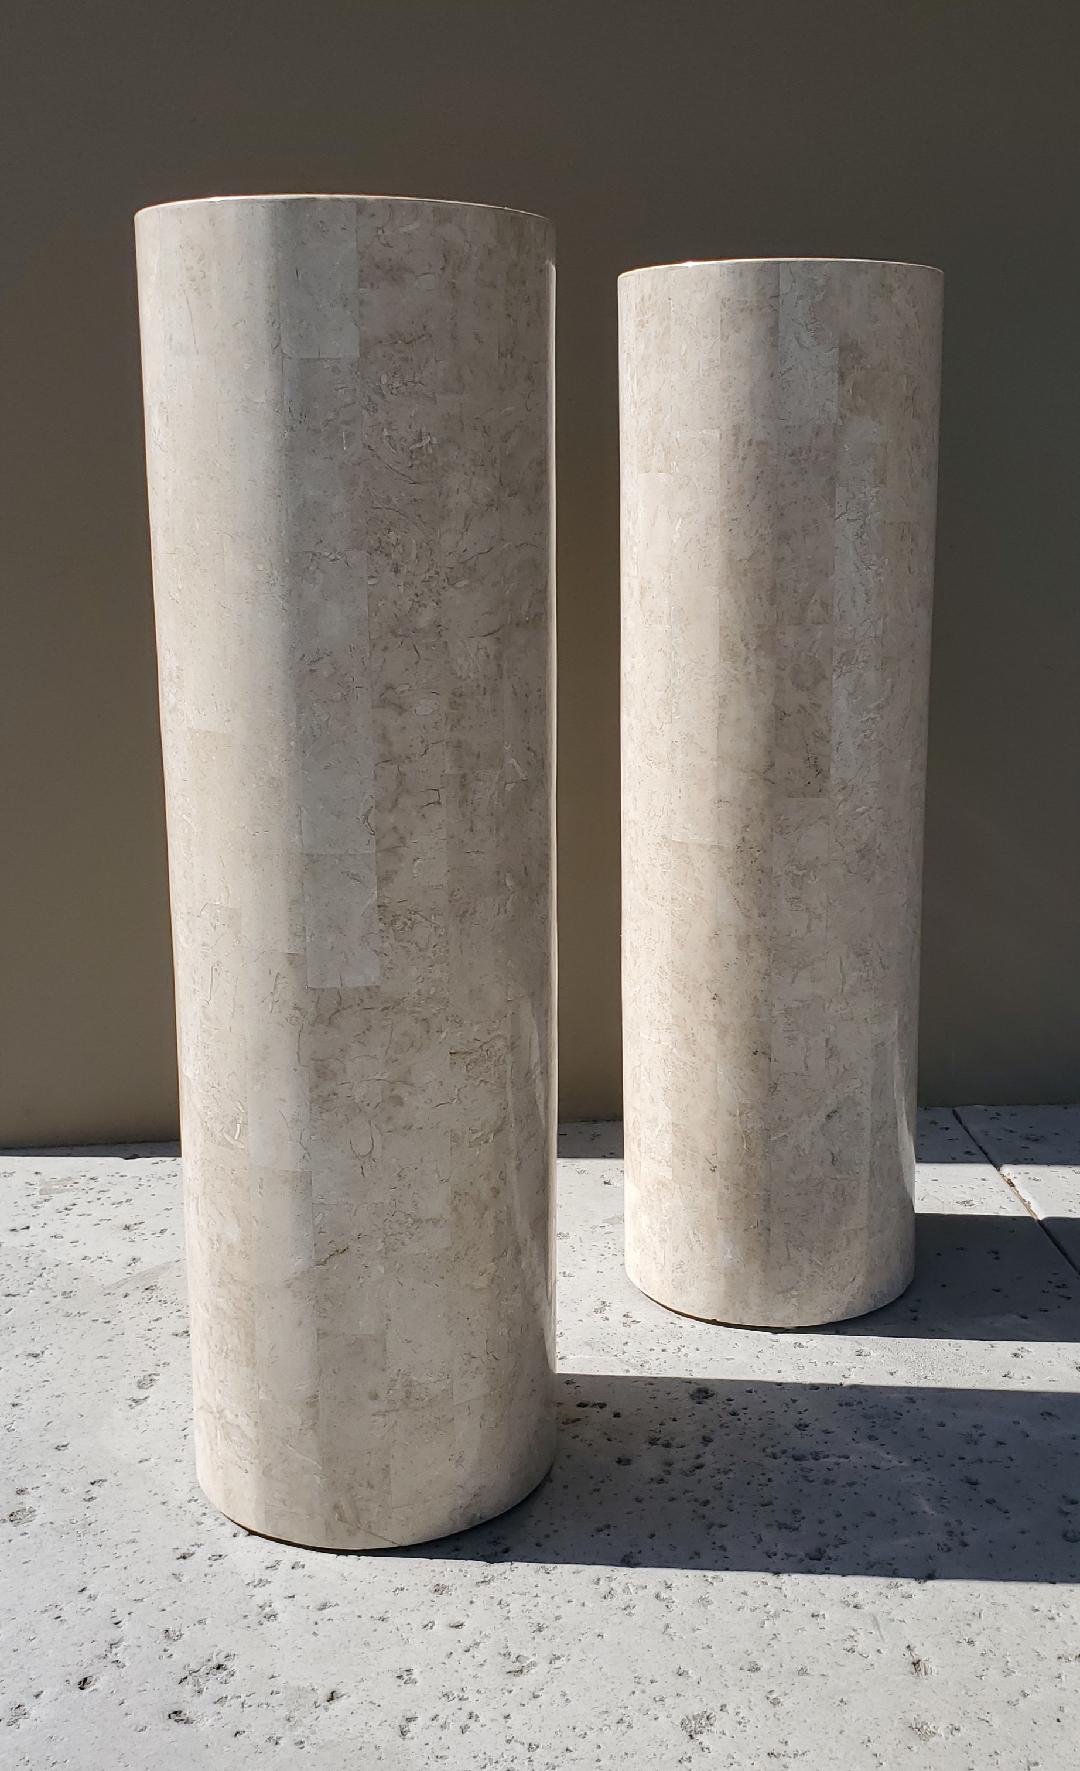 Marquis Collection of Beverly Hills, 1980s Round Tessellated Stone Pedestals 2 9